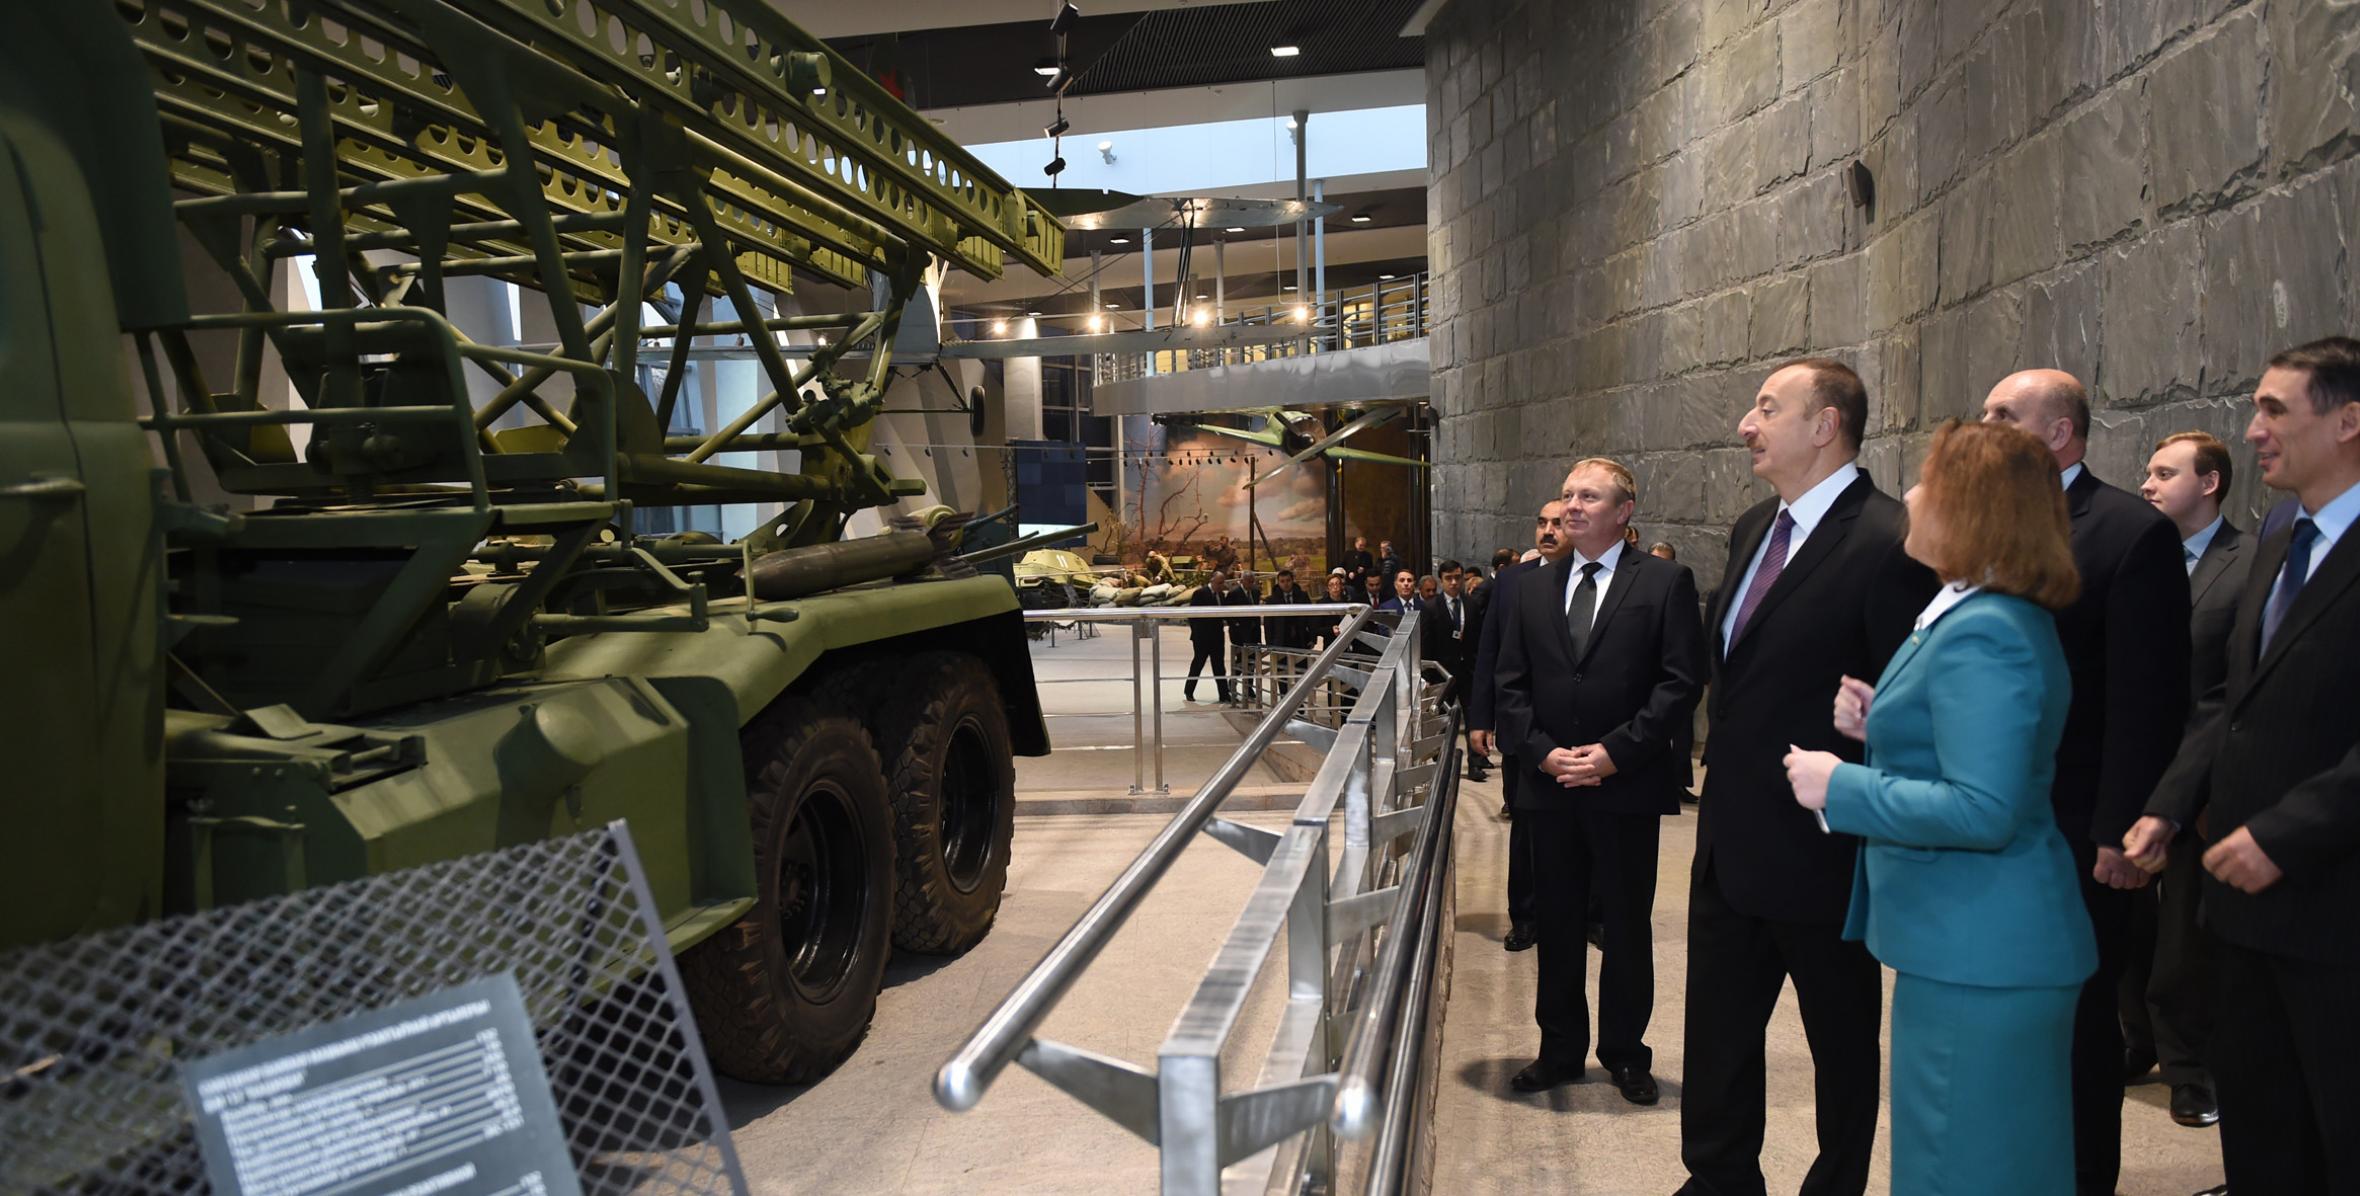 Ilham Aliyev viewed the Belarusian State Museum of the Great Patriotic War History